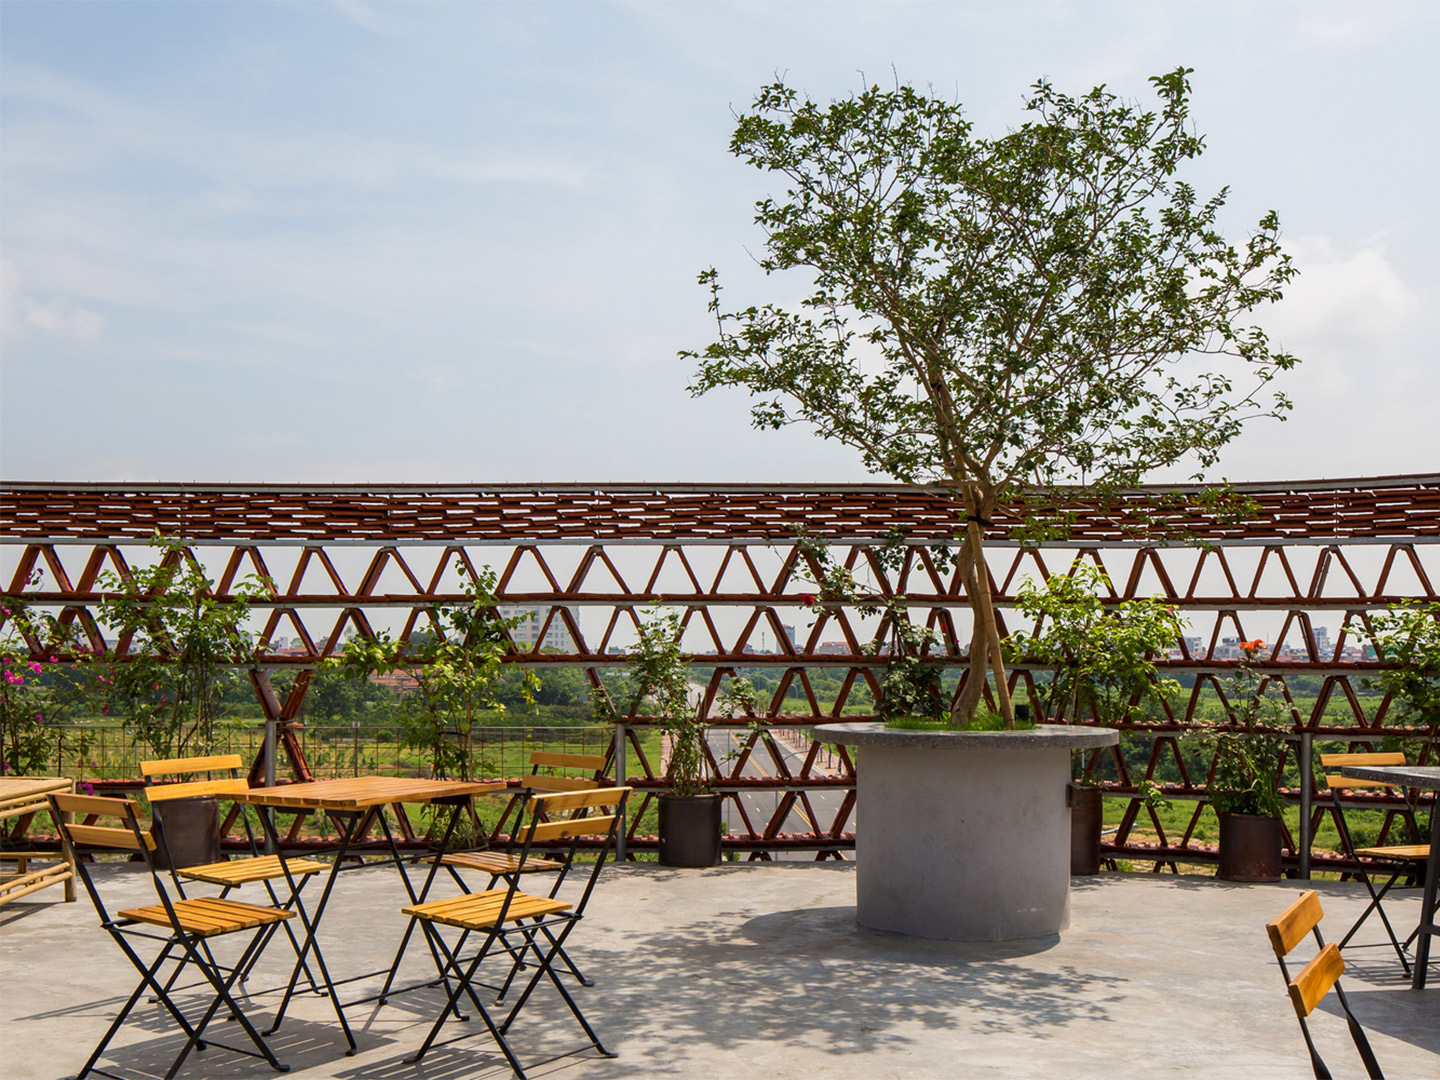 Ngói Space in Vietnam near Nahoi designed by H&P Architects